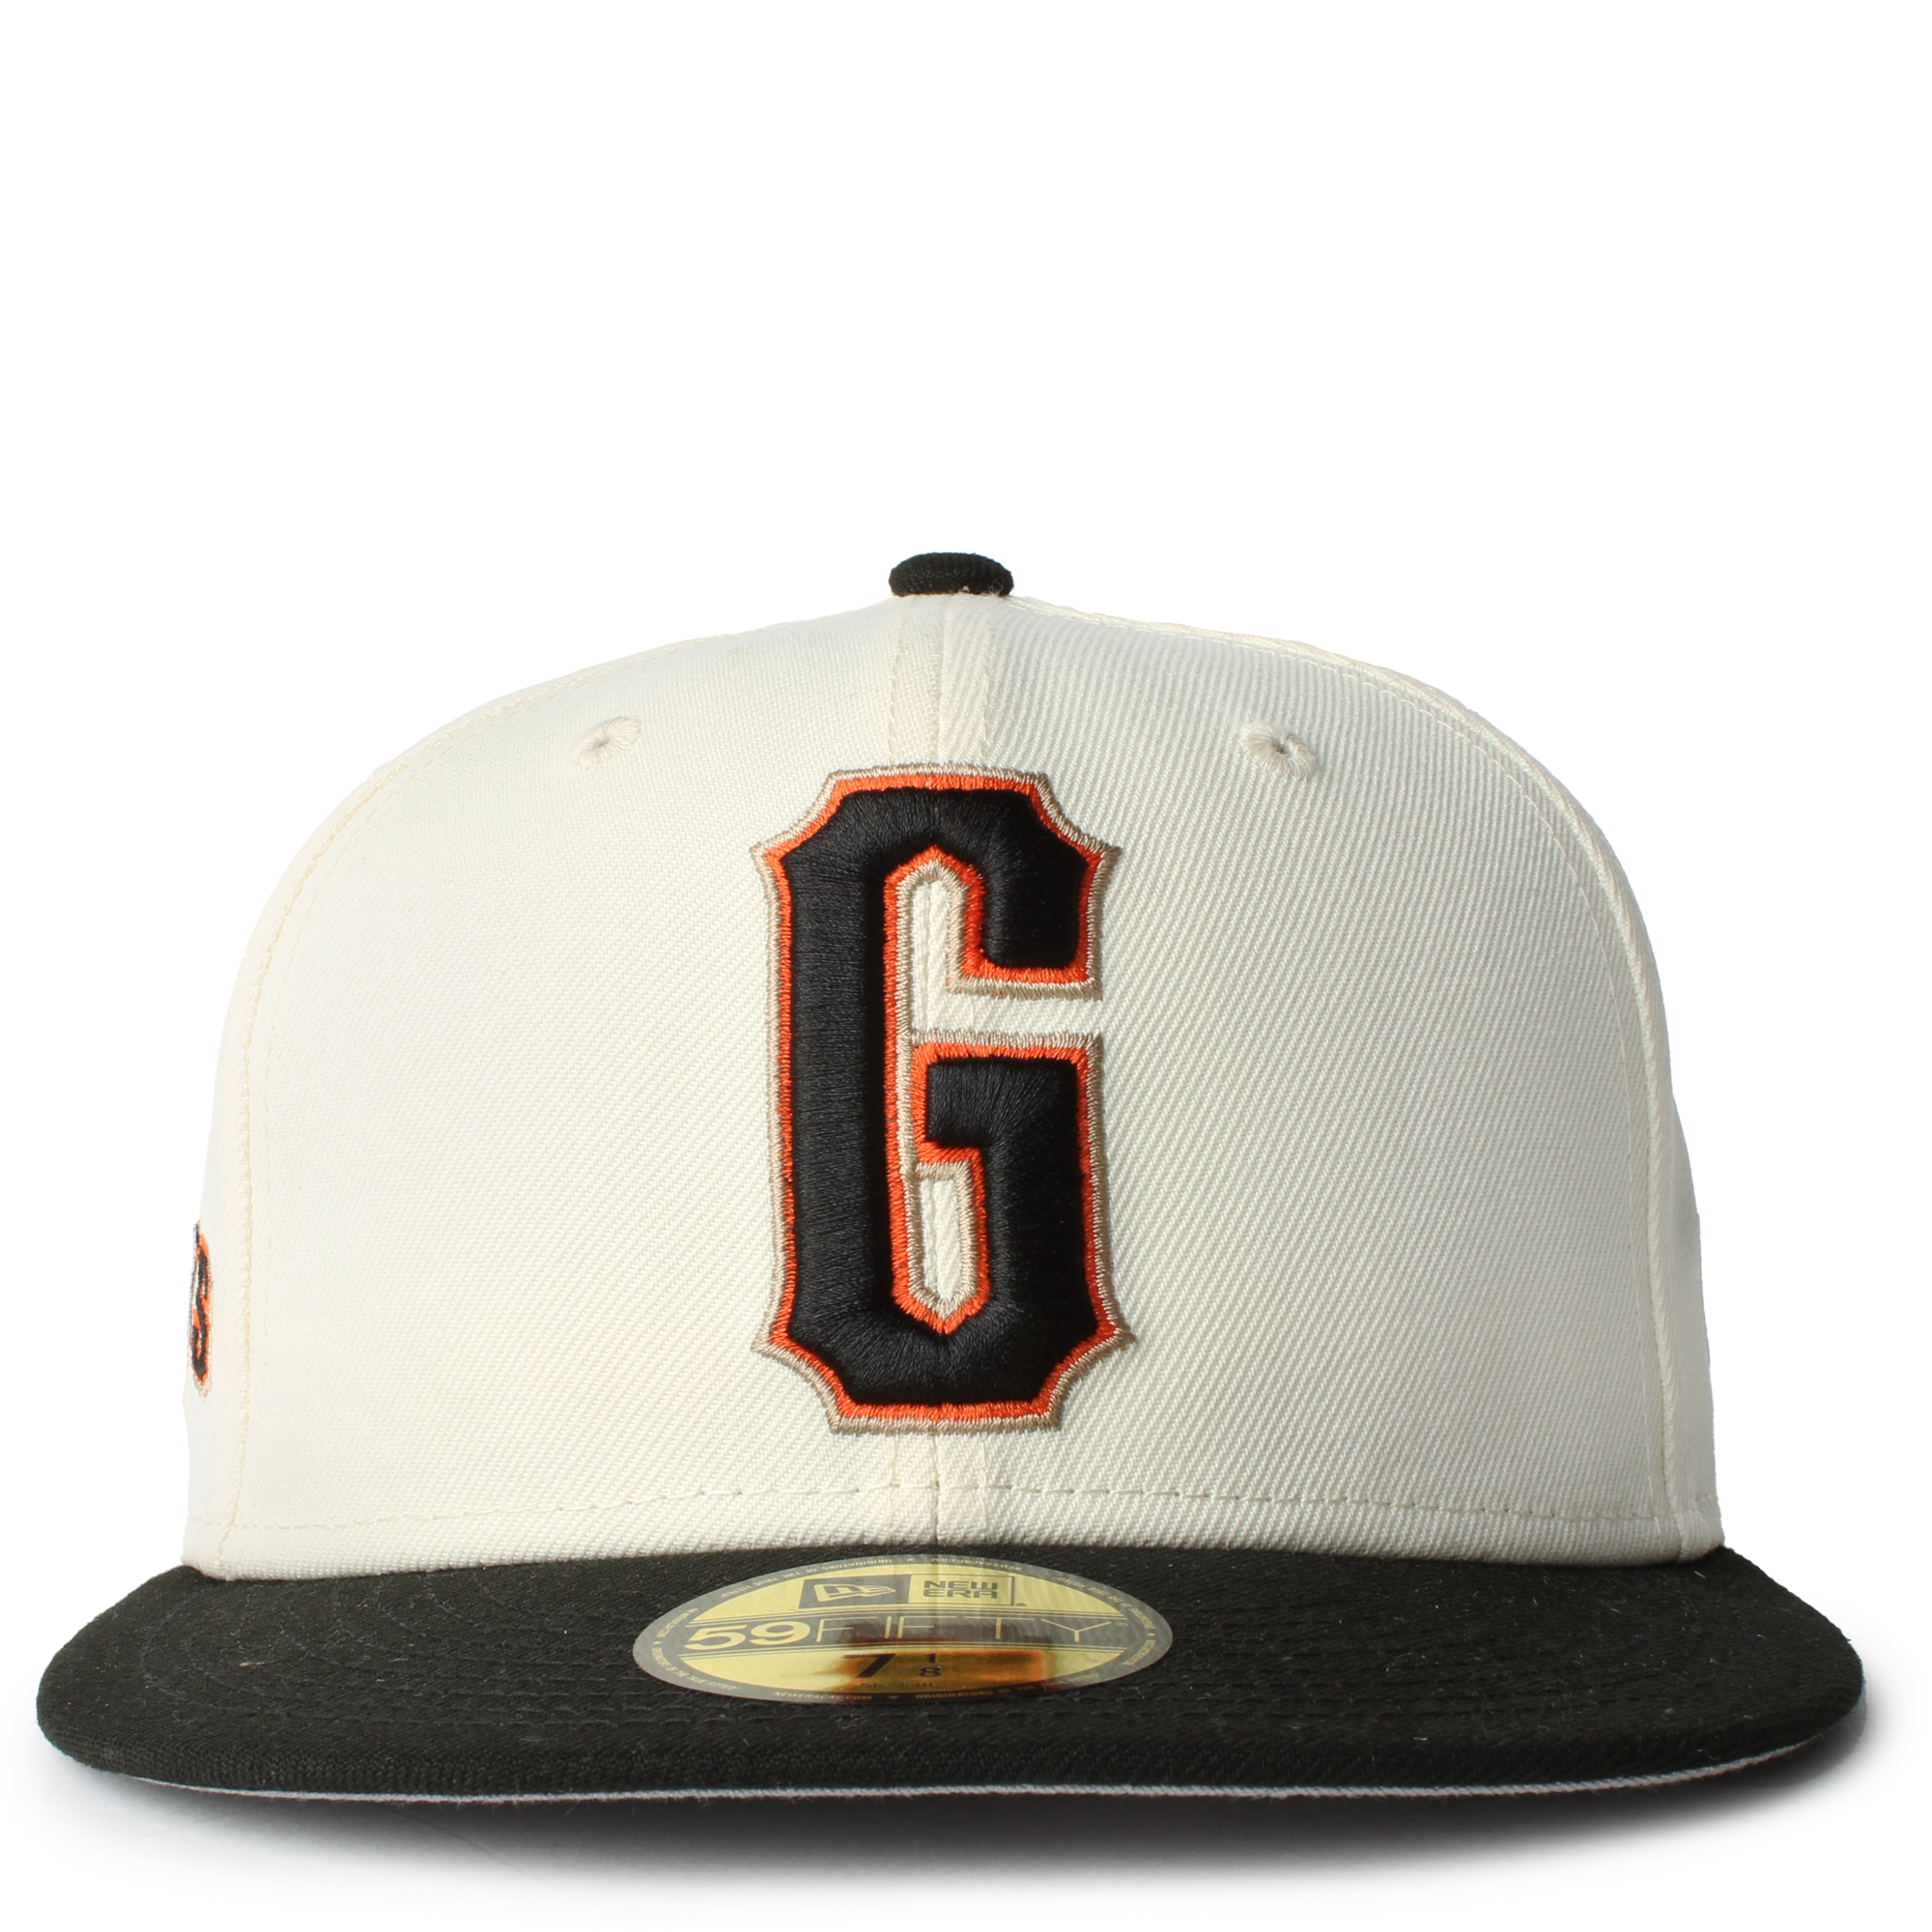 New Era Caps Retro City Giants 59FIFTY Fitted Hat Multi Color